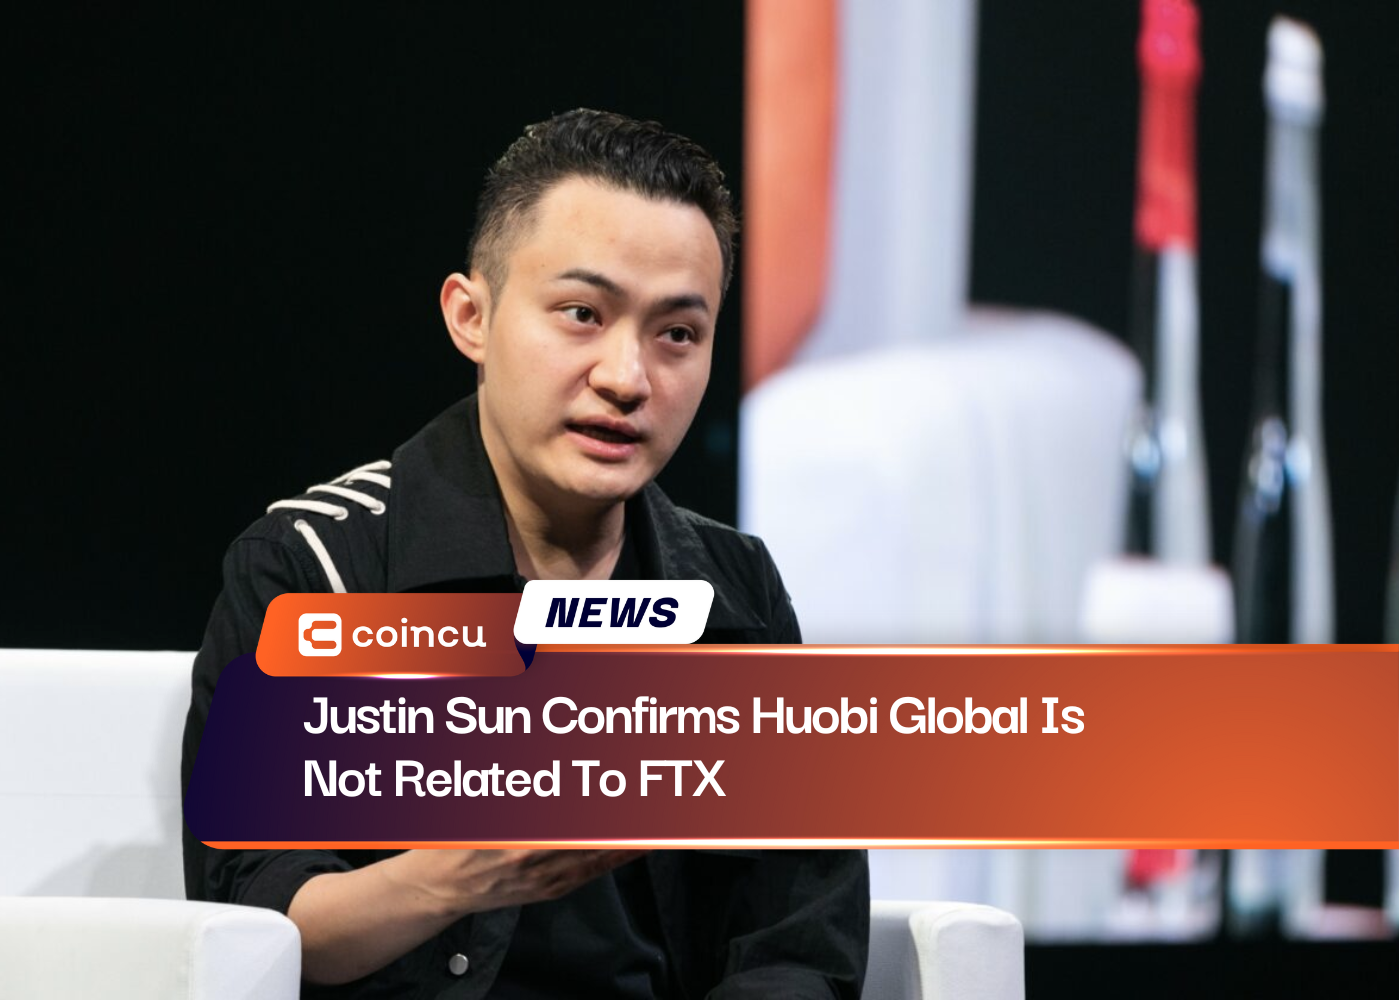 Justin Sun Confirms Huobi Global Is Not Related To FTX